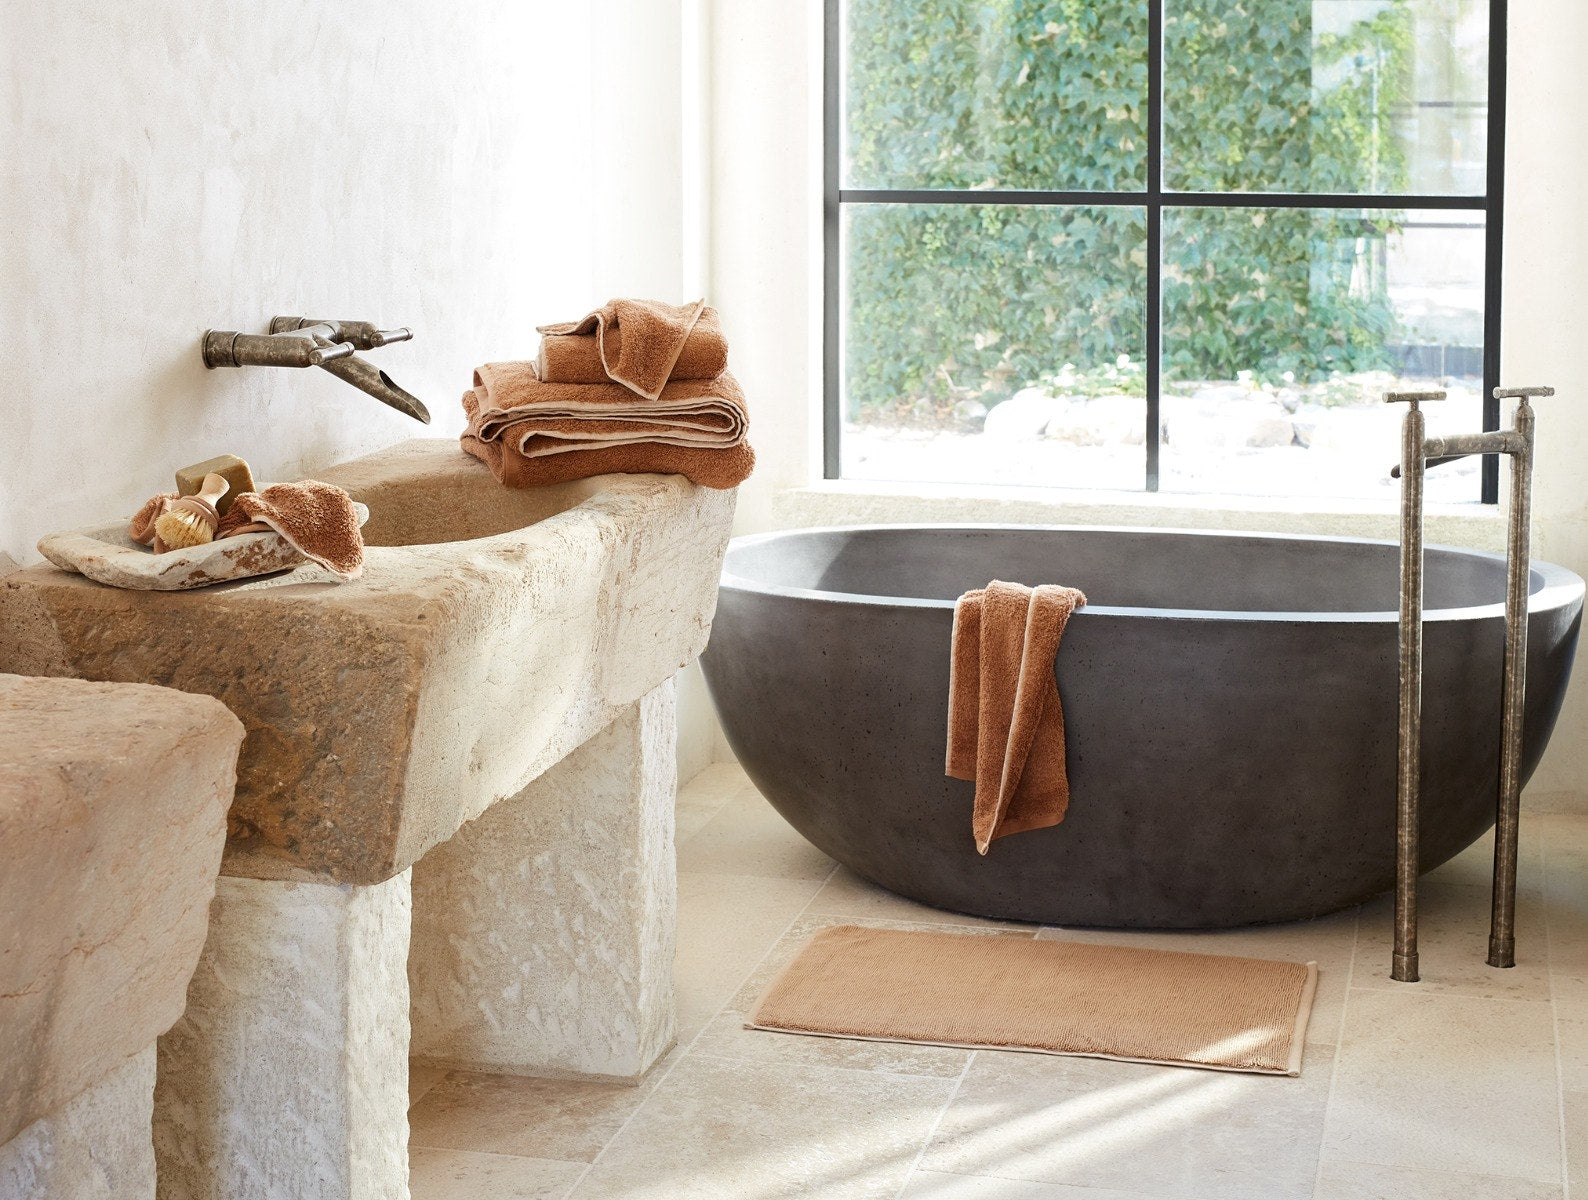 Clearance Sale  Up to 70% off Luxury Towels, Bath Mats & Throws